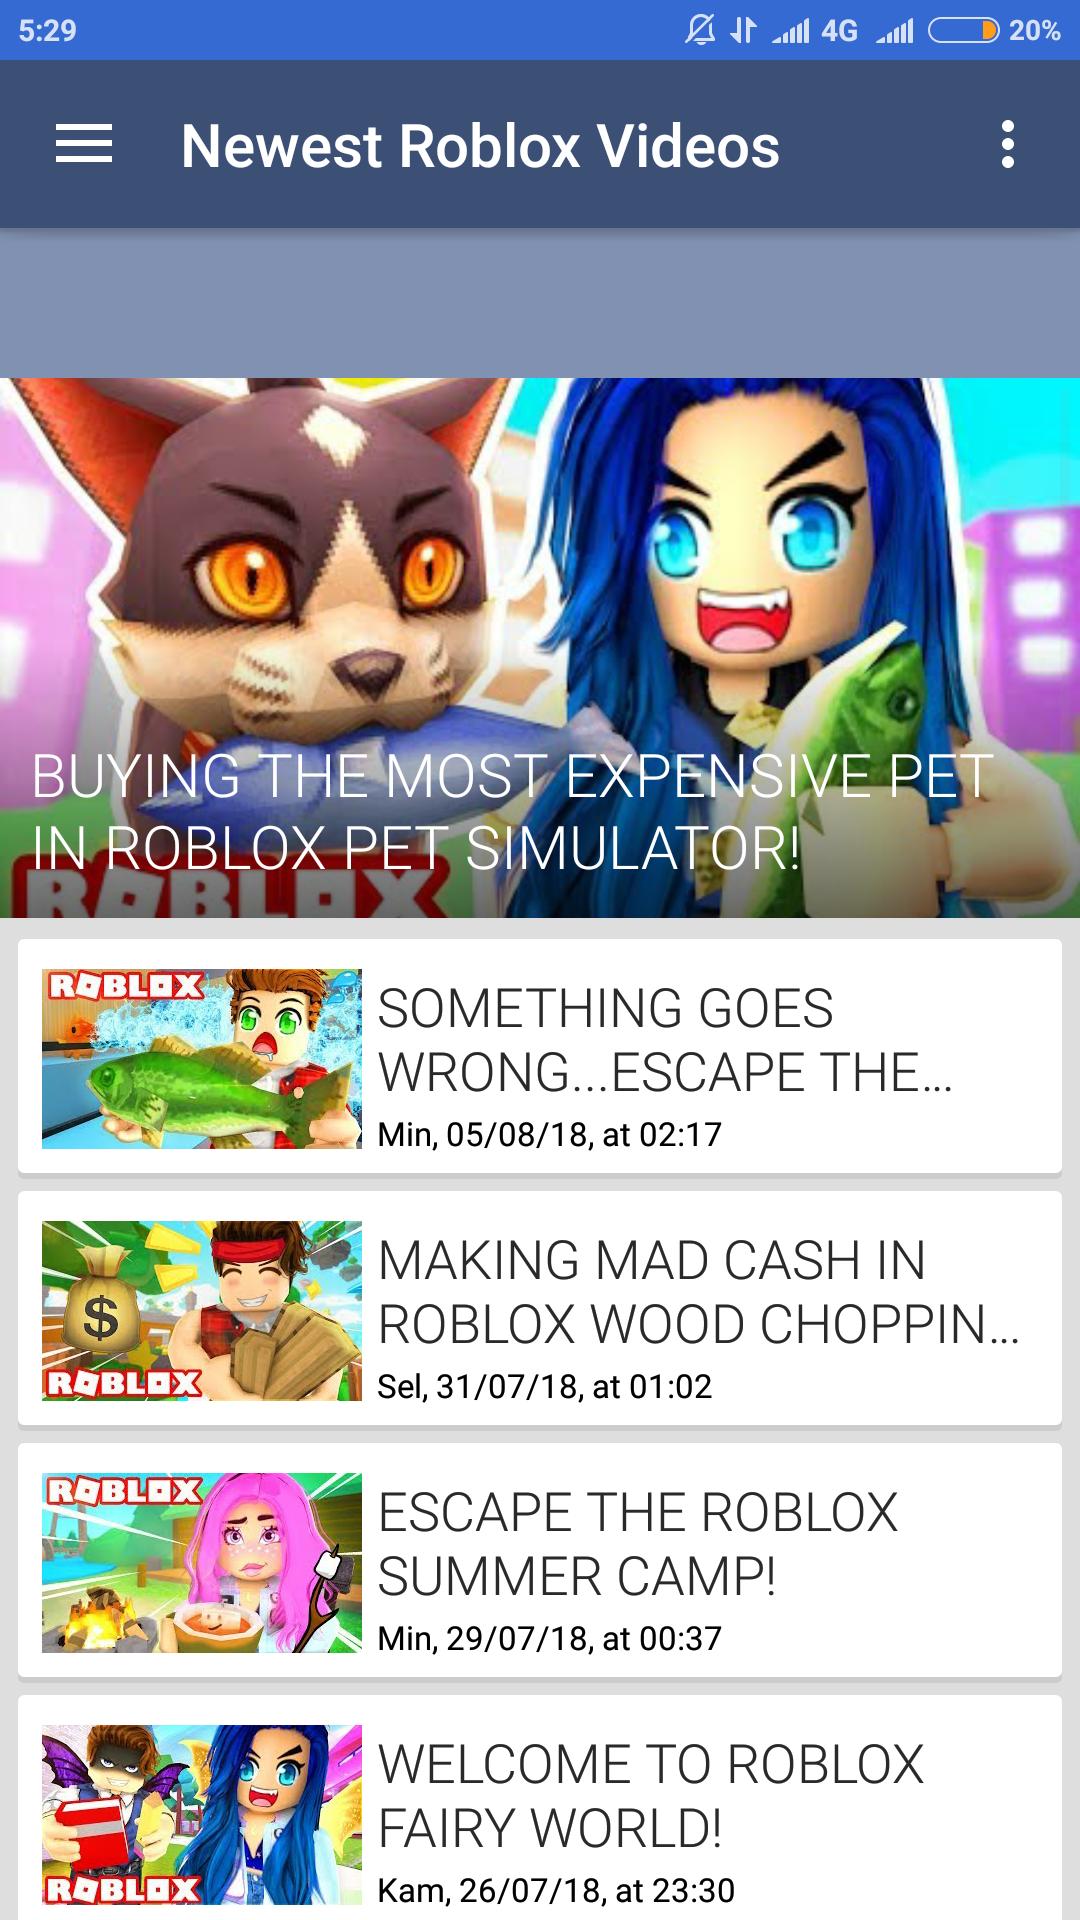 Video For Itsfunneh Roblox For Android Apk Download - itsfunneh roblox new videos